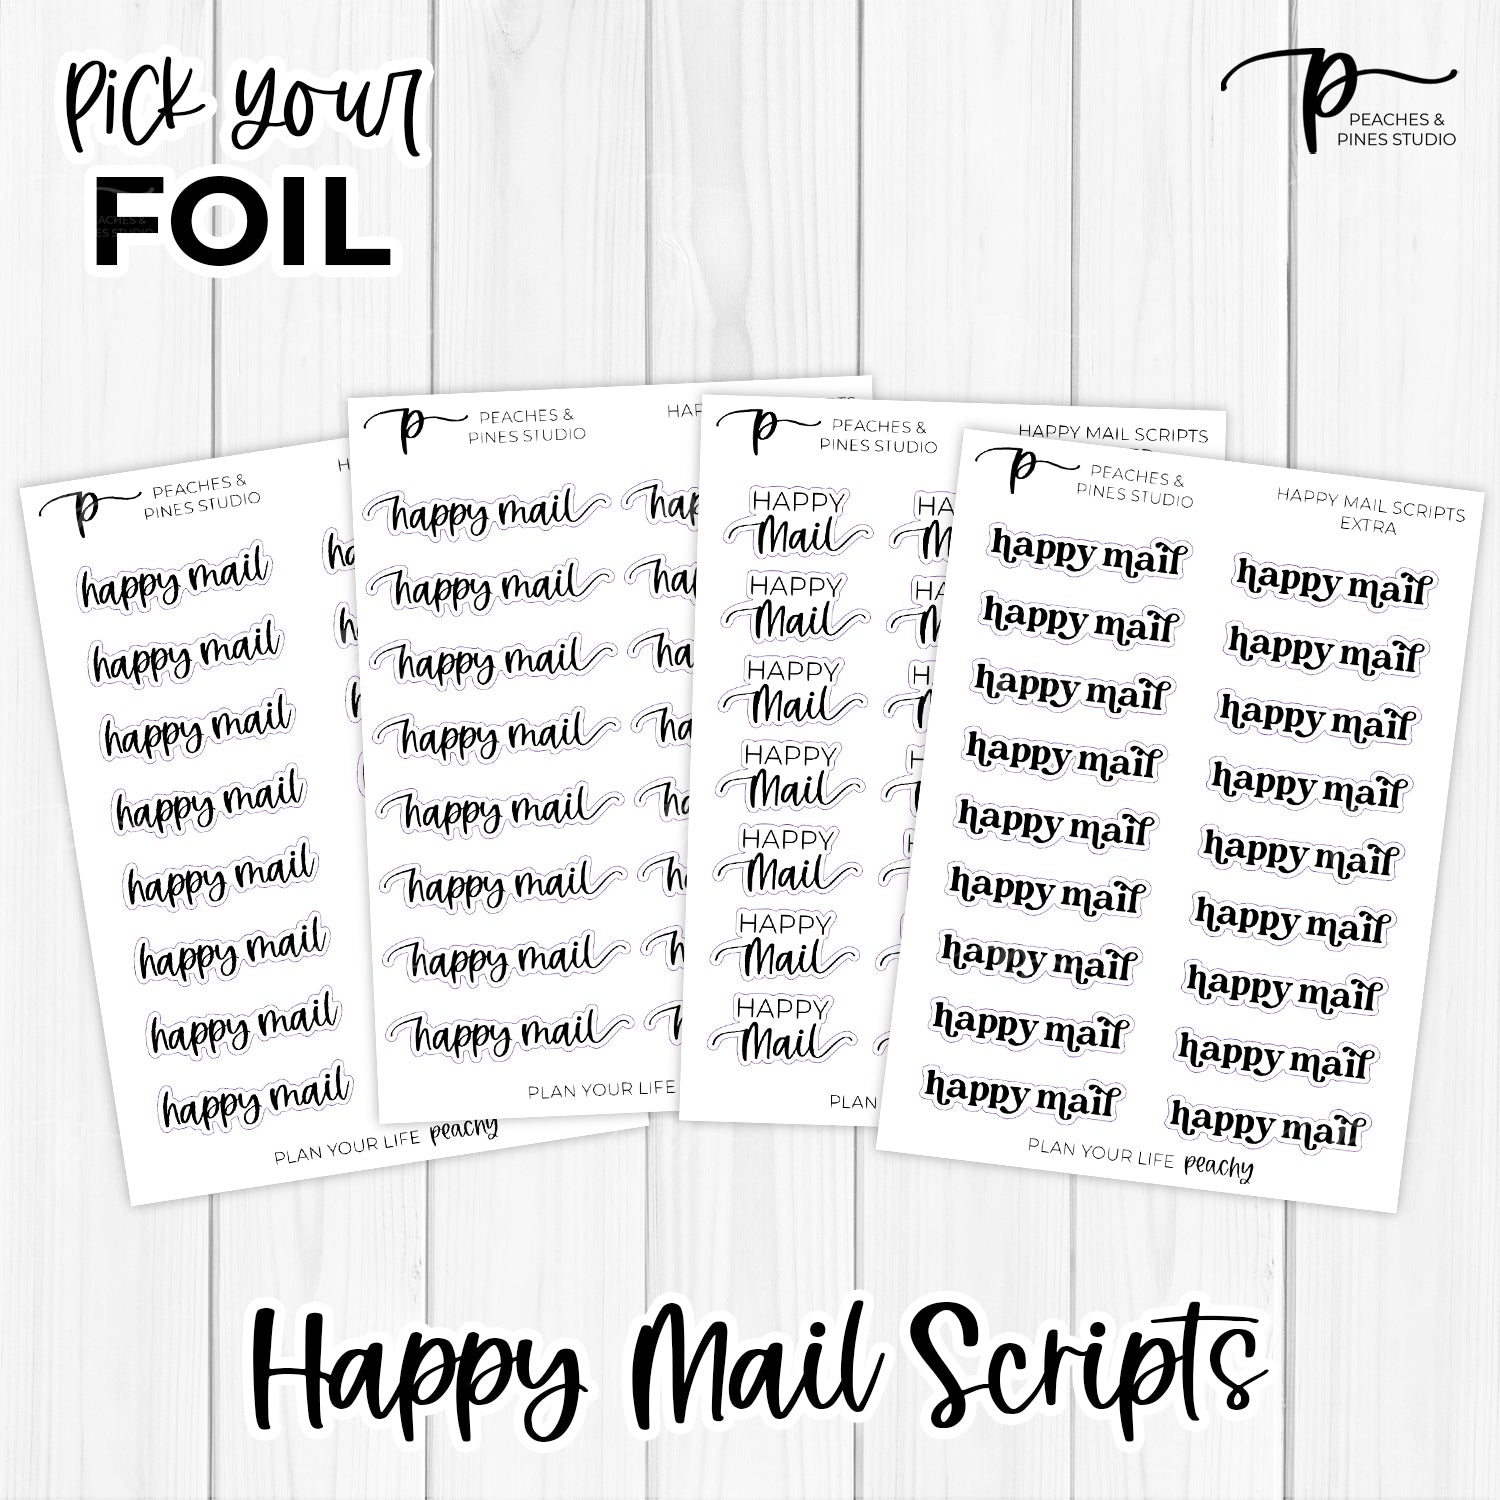 Happy Mail - Foiled Scripts